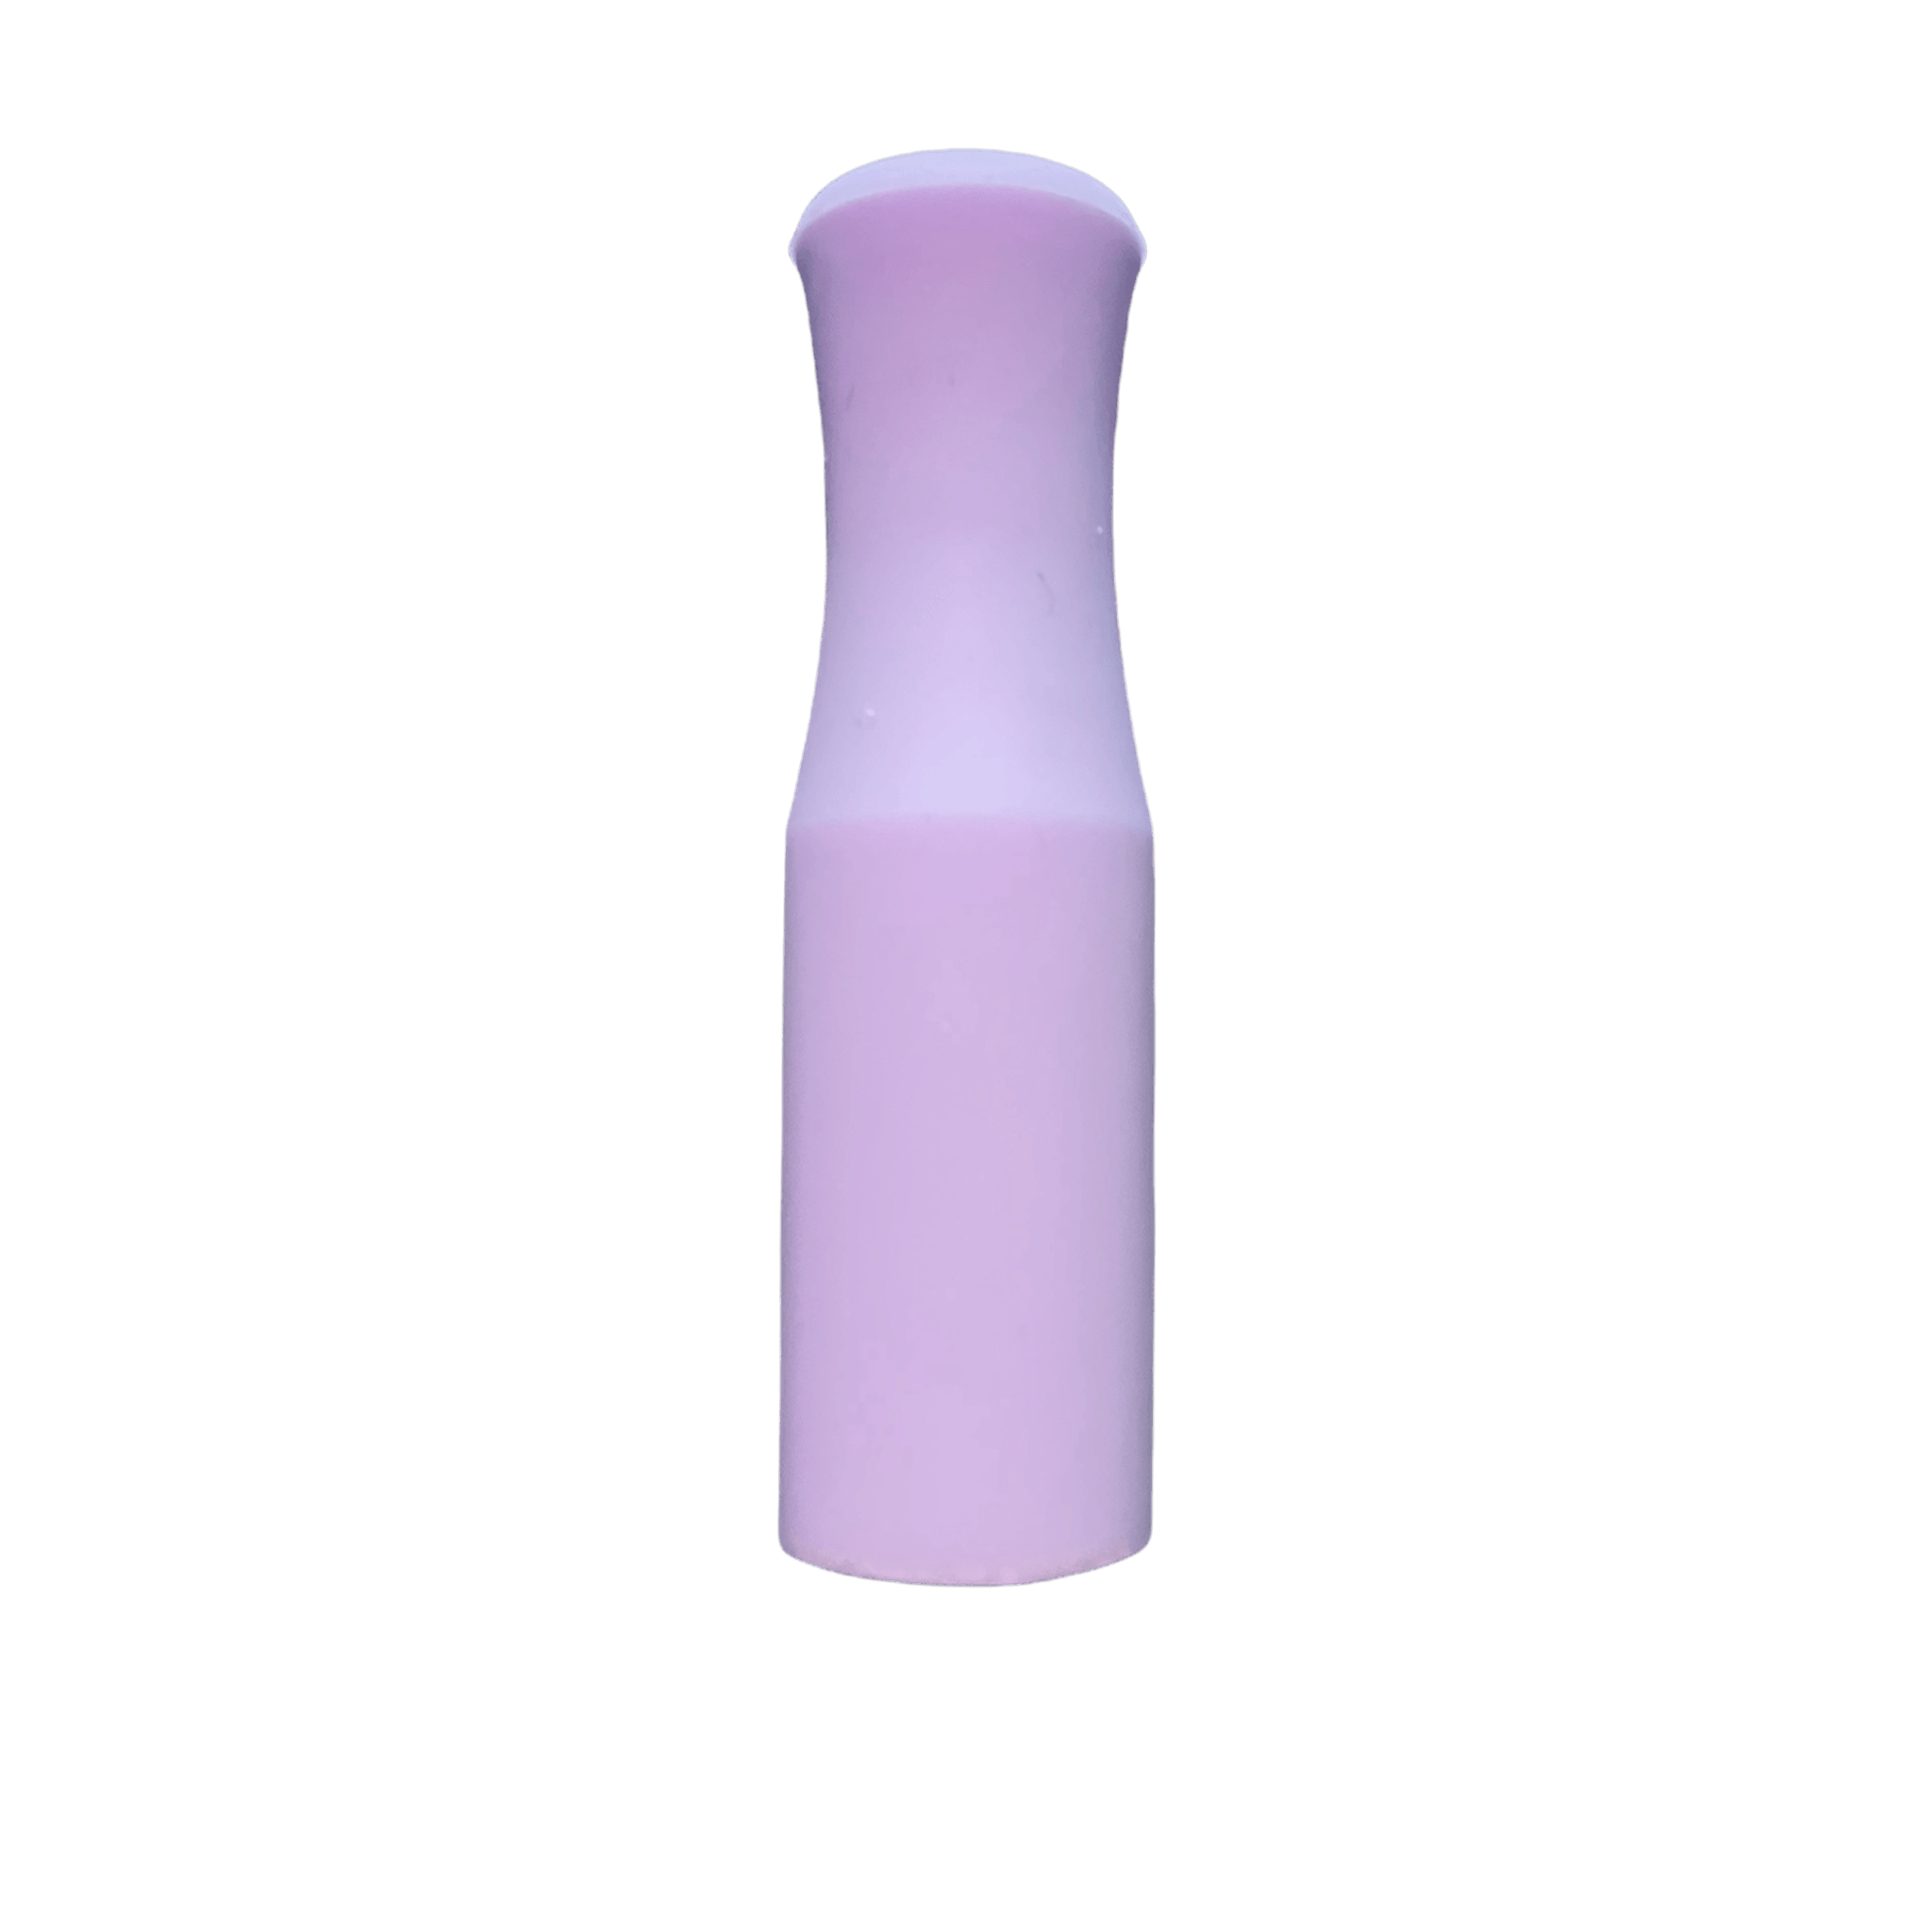 6mm Silicone Skinny Straw Tips